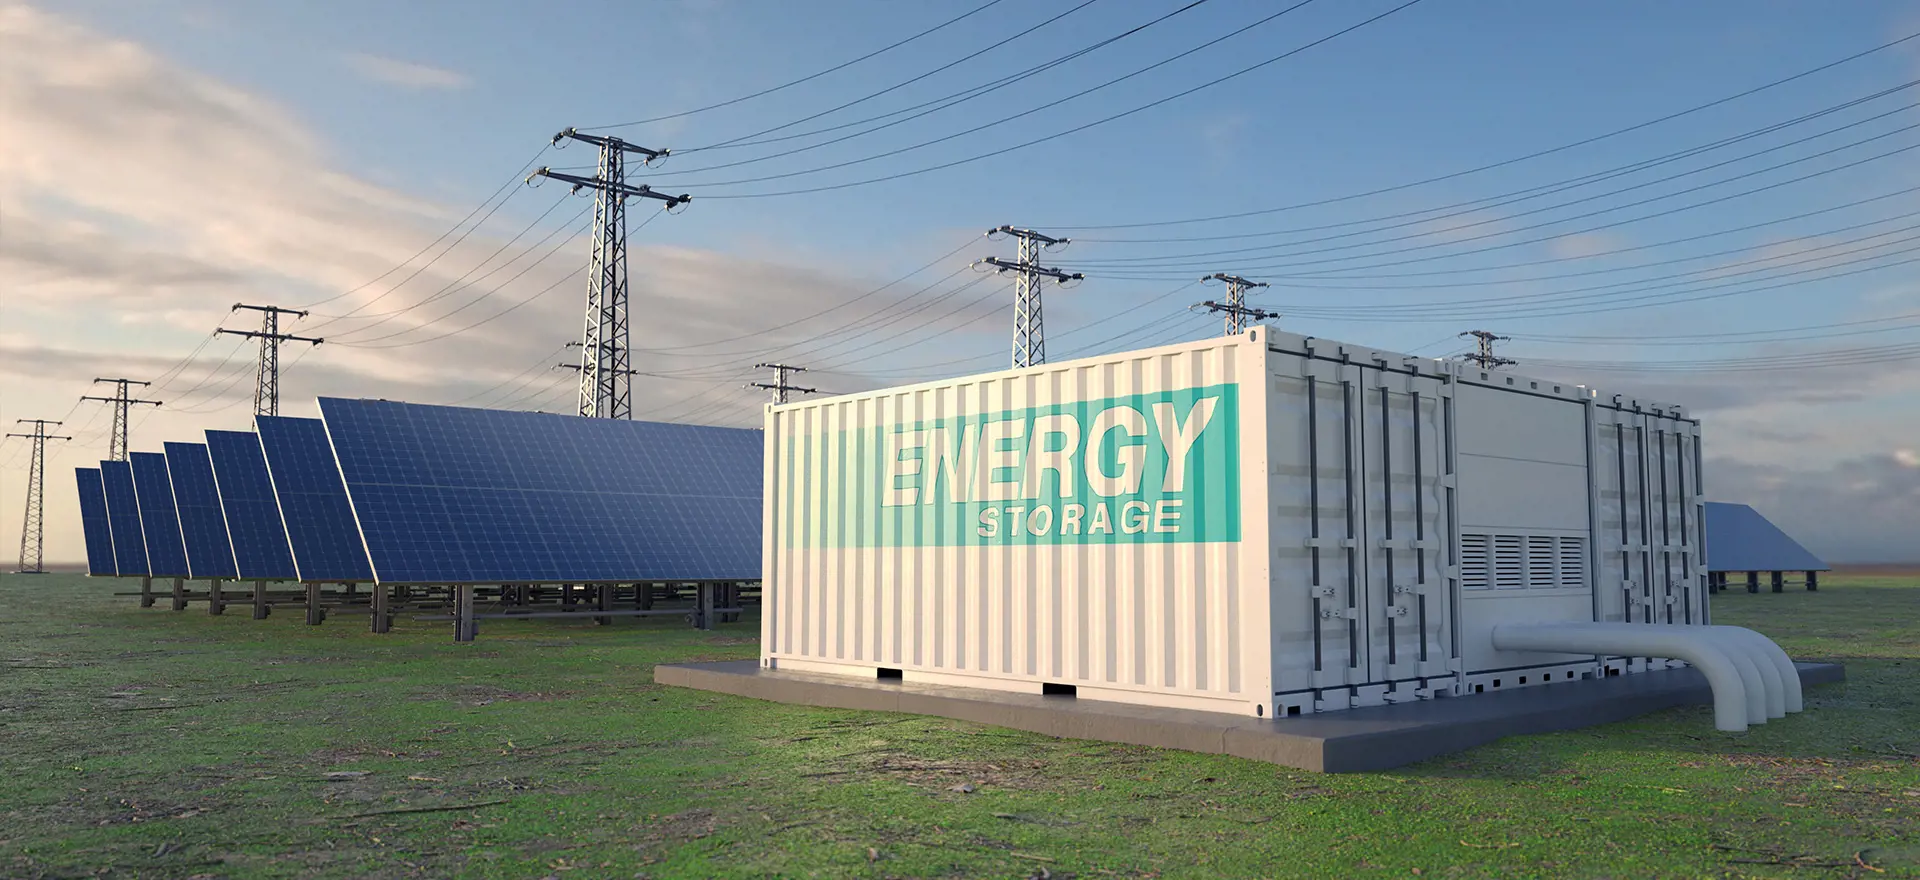 Battery Energy Storage: A New Consultation on Fire Risk and Safety